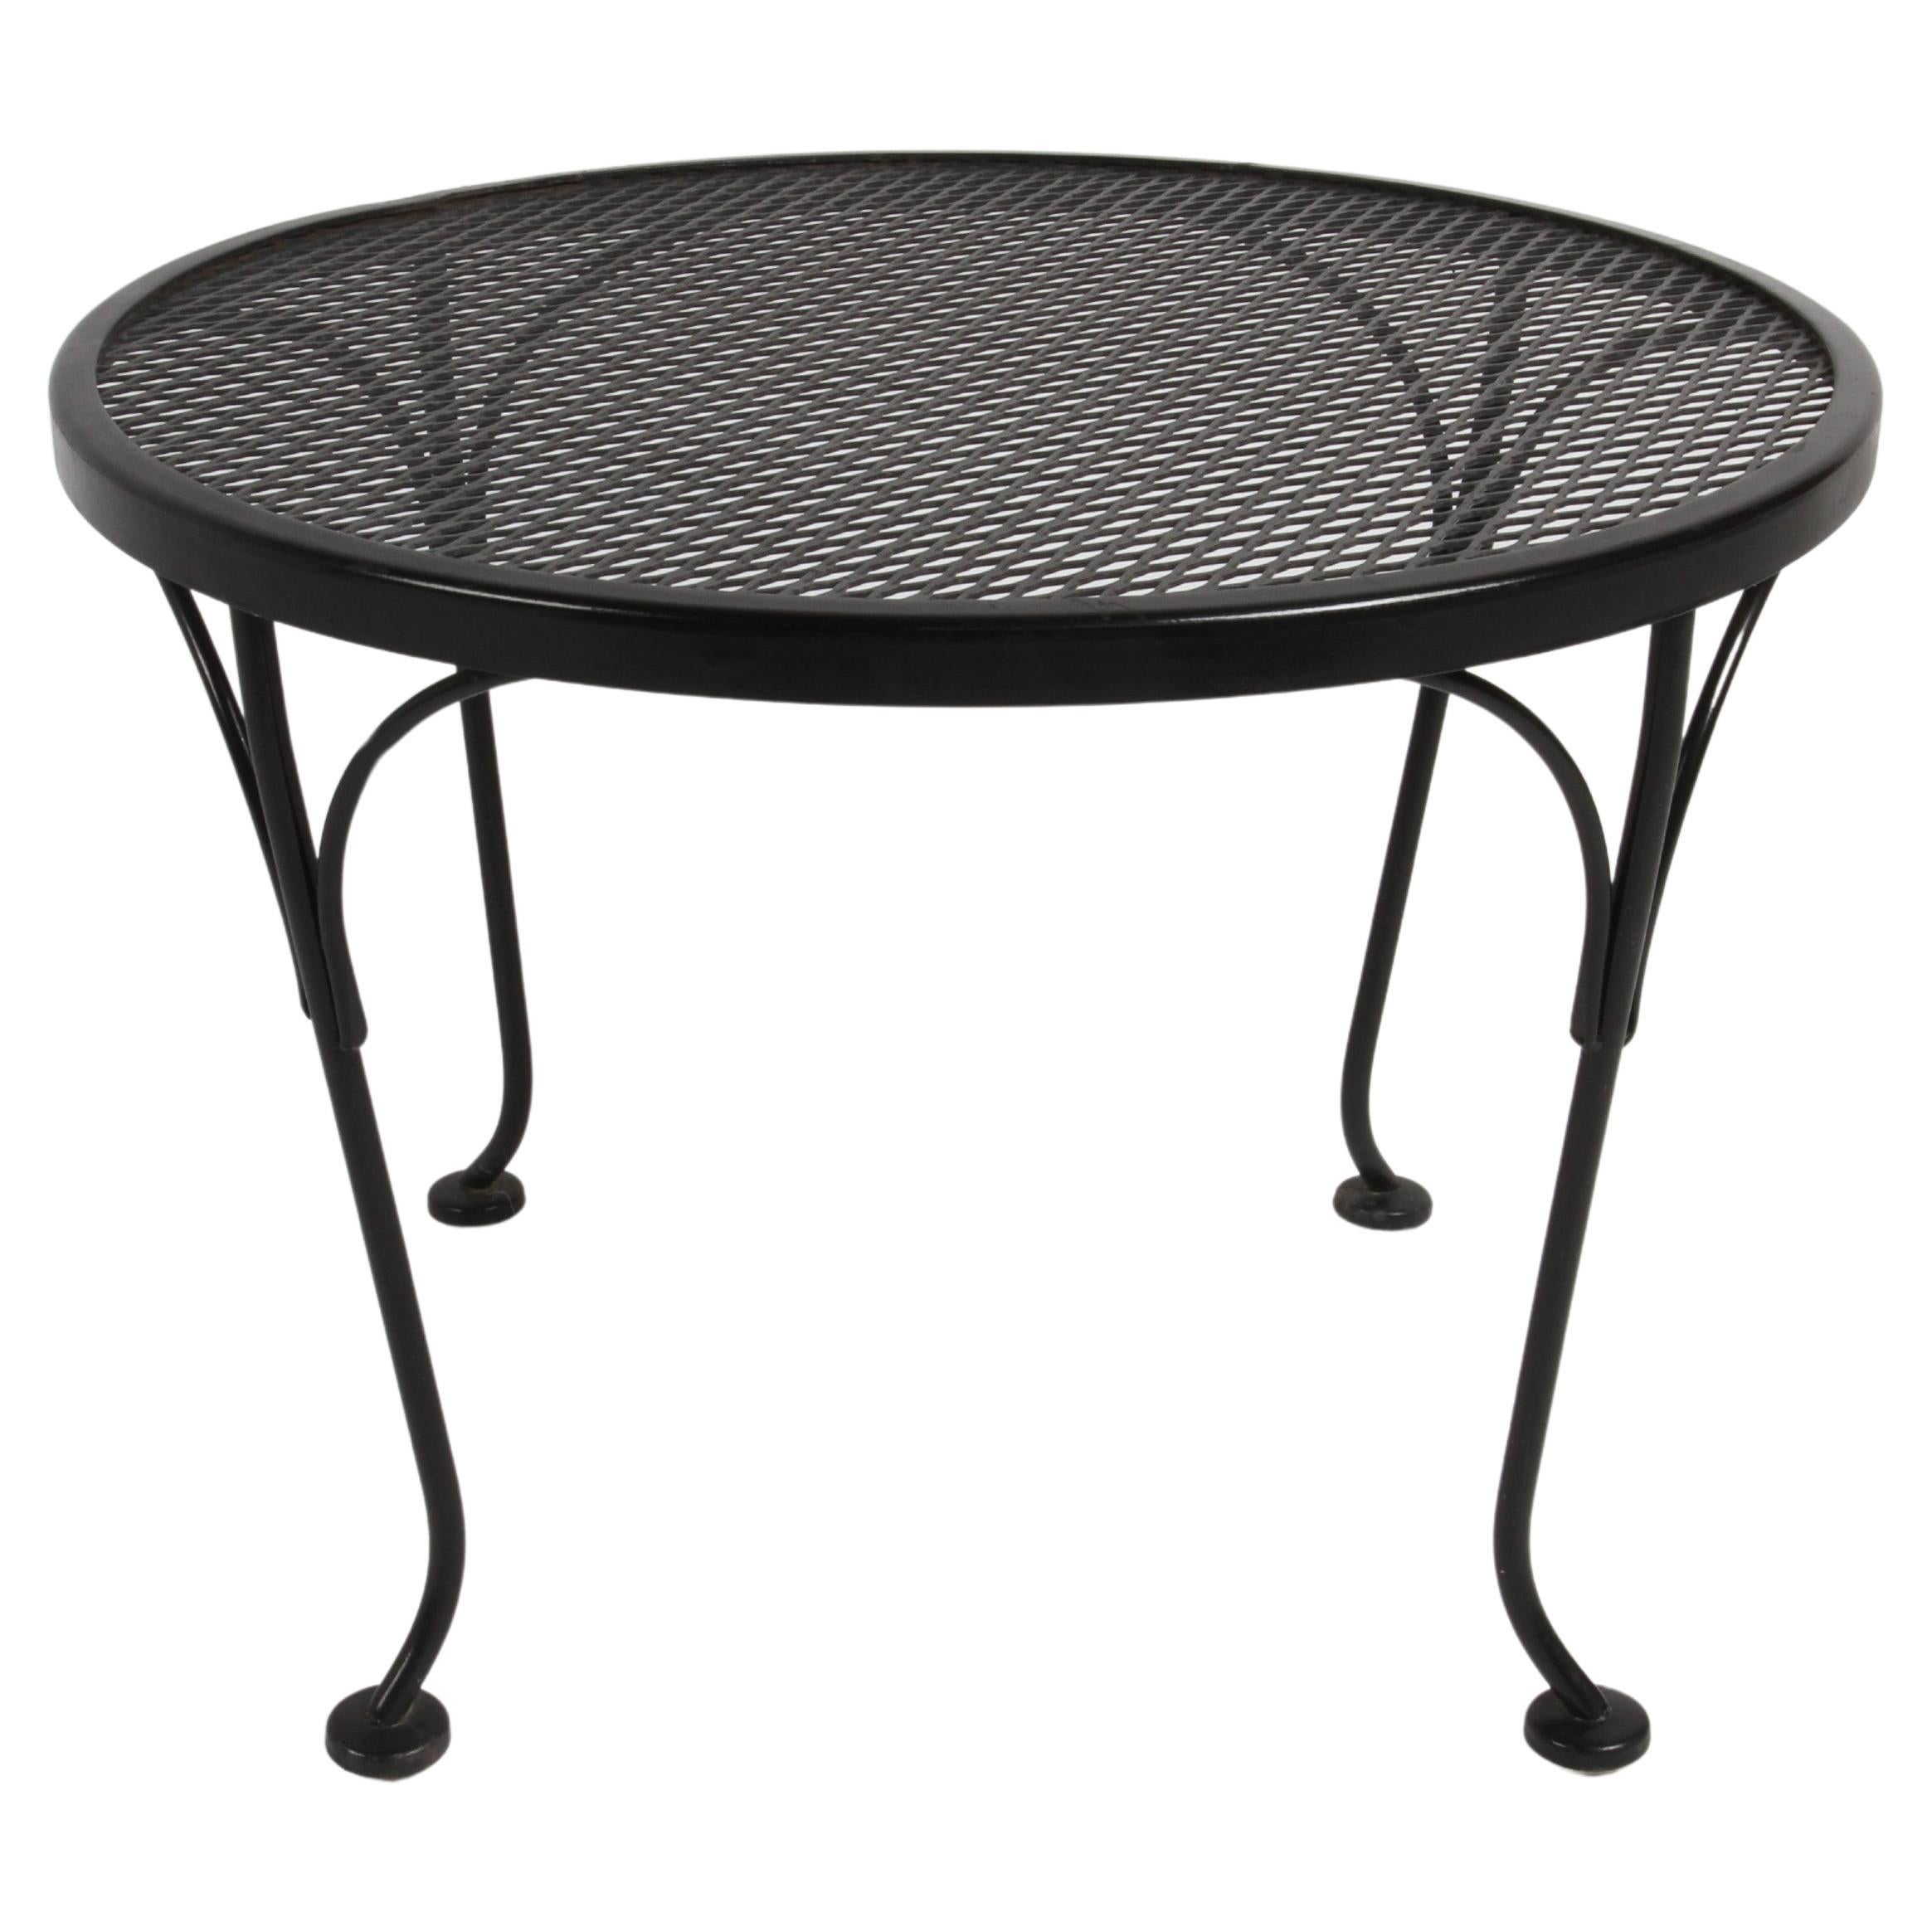 Russell Woodard Round Black Wrought Iron & Mesh Patio Coffee of Side Table  For Sale